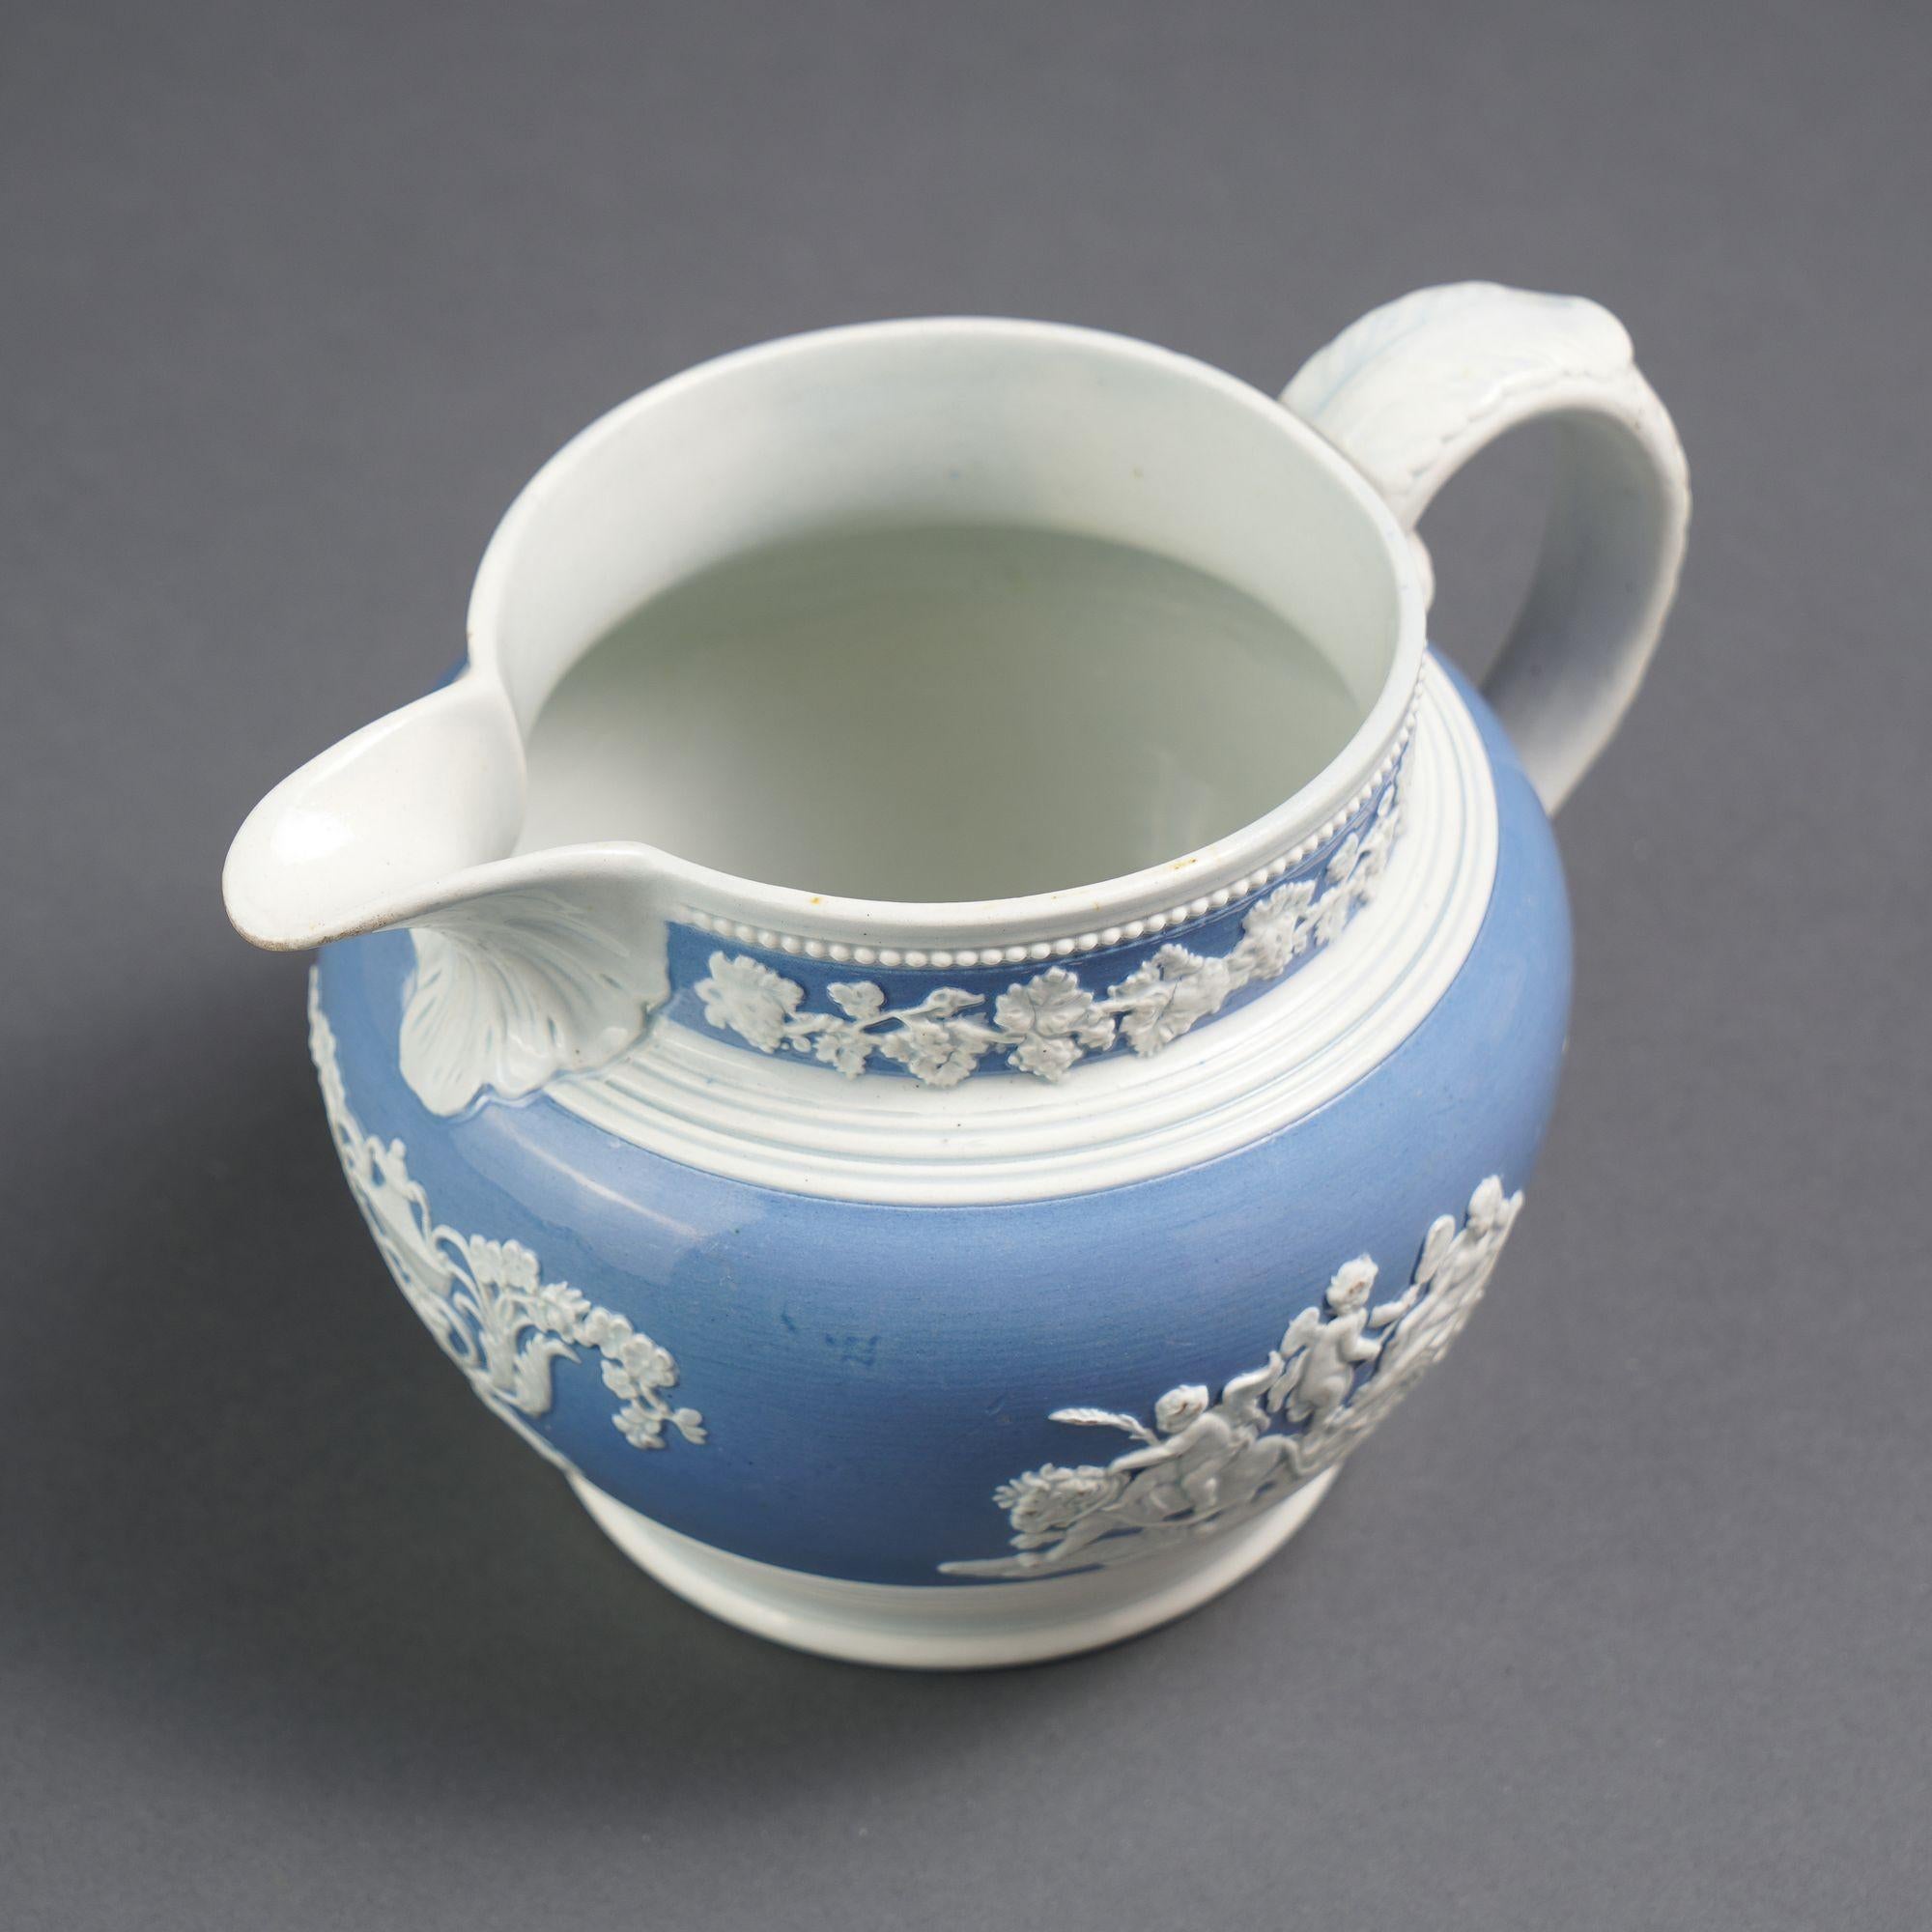 English Staffordshire pearlware pitcher by Chetham & Woolley, 1820-30 For Sale 3